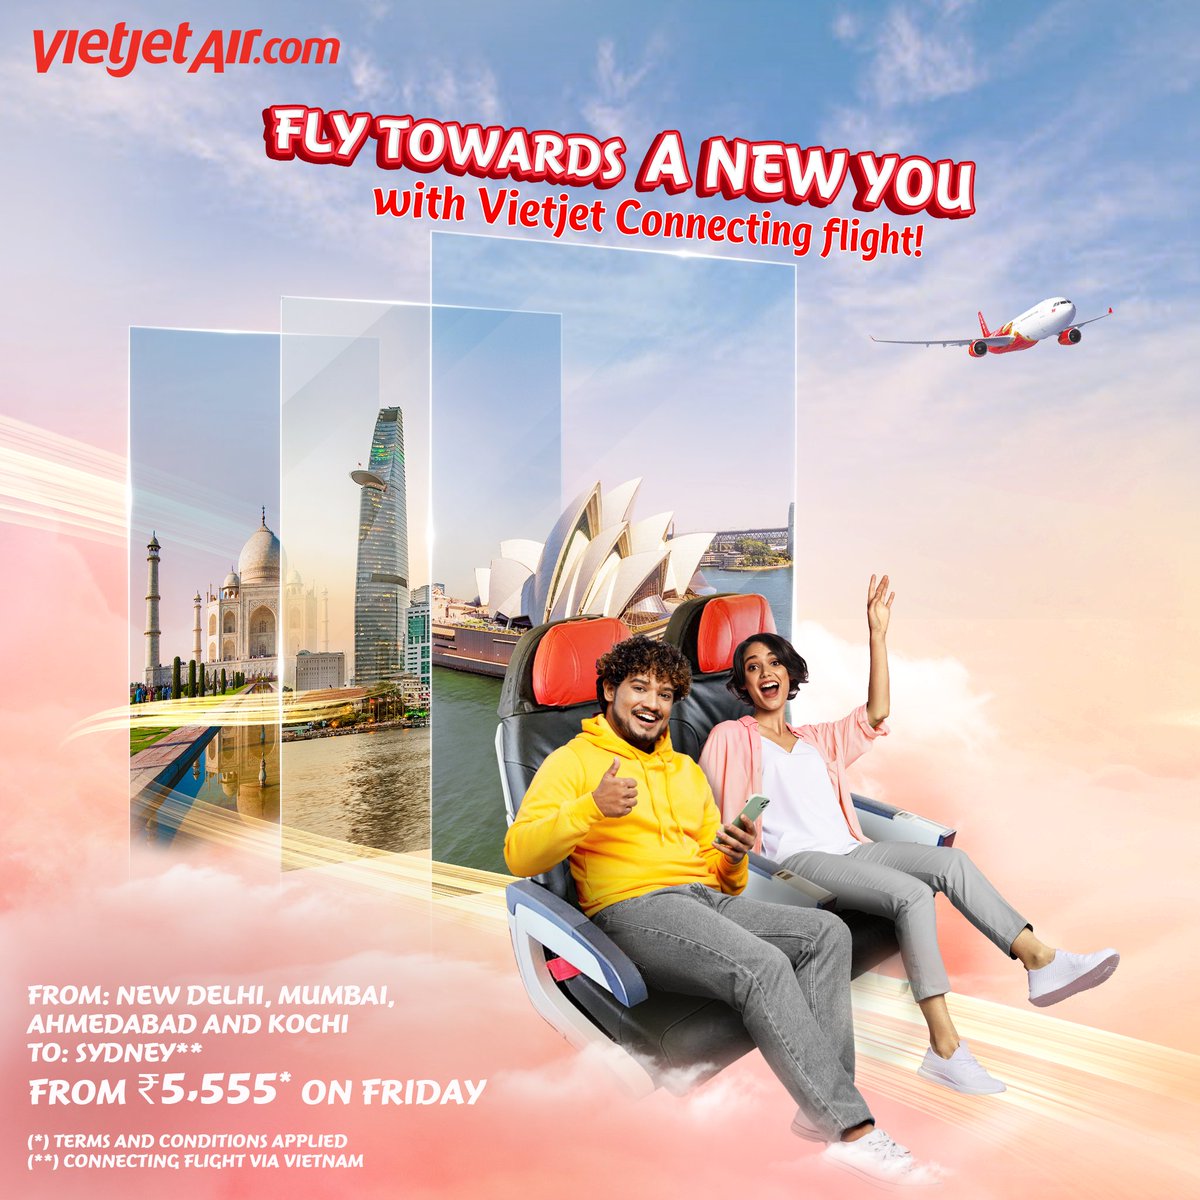 Transform your journey with Vietjet! ✈ Seamless layovers in Vietnam enhance your travel to the final destination 💖Book at ₹5,555* on Fri from New Delhi, Mumbai, Ahmedabad, Kochi to Sydney** 👉bit.ly/TW_YourRealDea… (*) T&C apply (**) Connecting flight via Vietnam #Vietjet